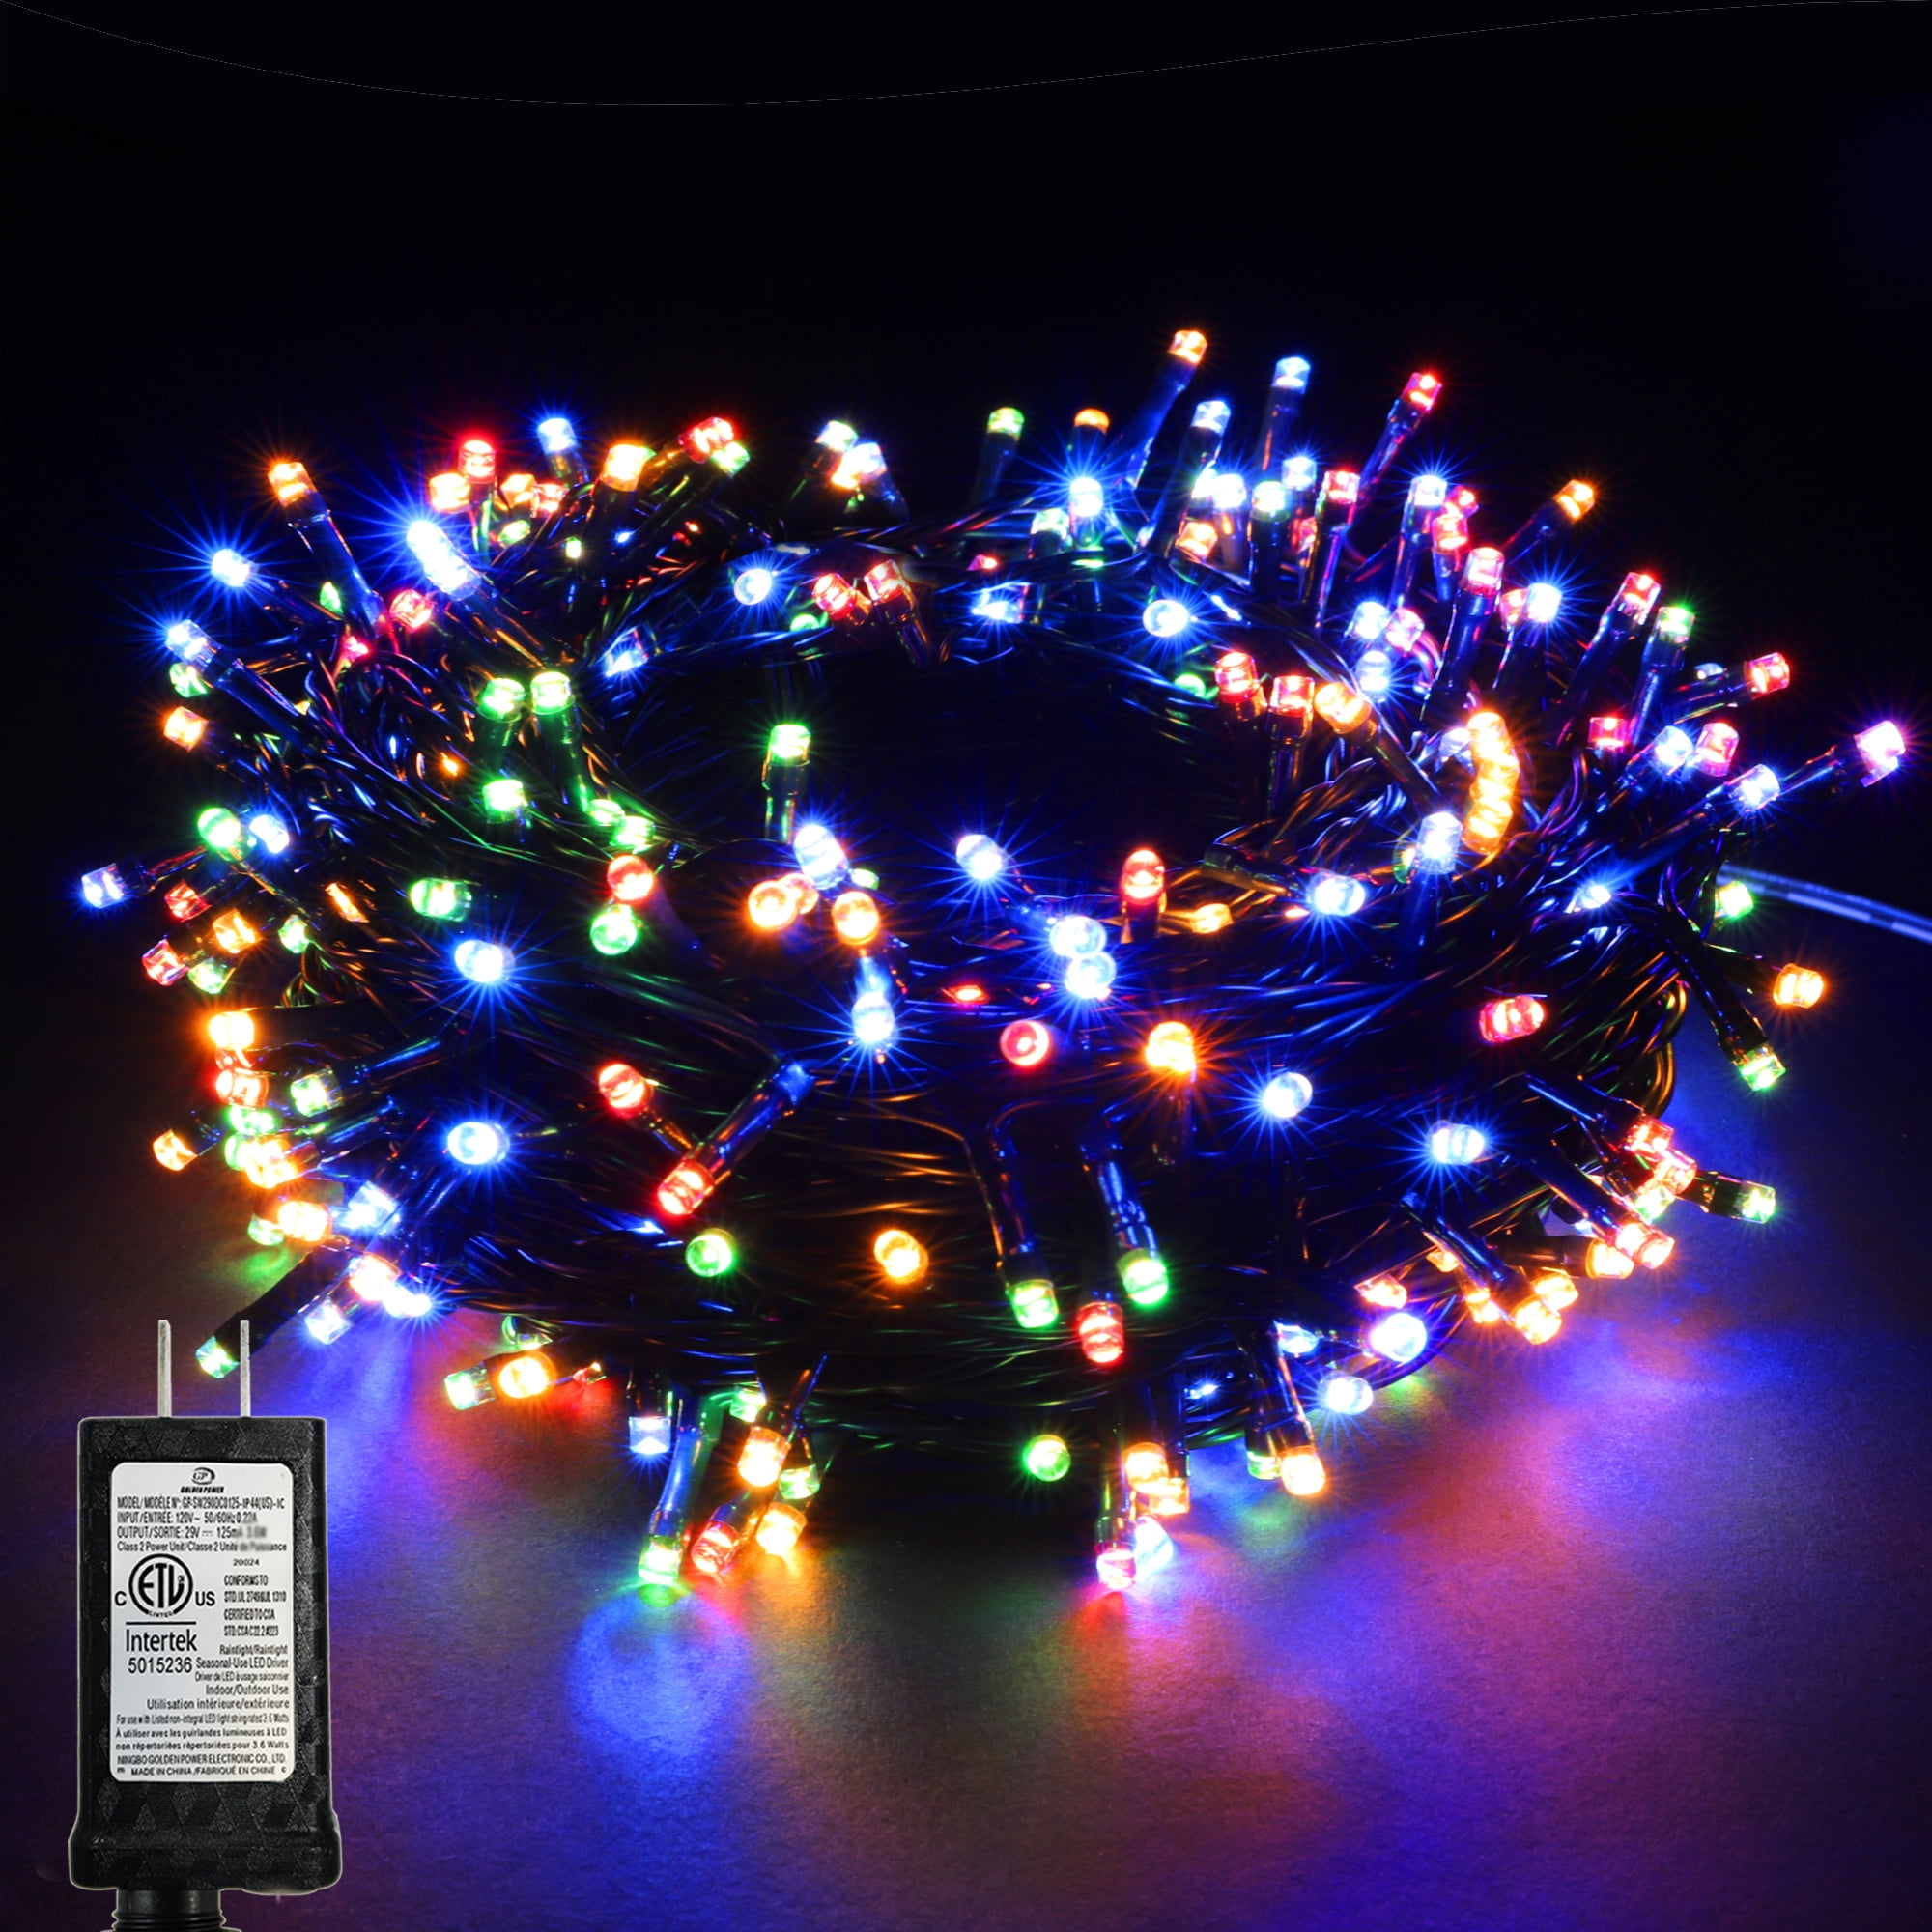 Garden Wedding Yard Parties Renewed Waterproof Decorative Lights for Bedroom Gate TaoTronics 33ft 100 LED String Lights 2 Pack Dimmable with Remote Control Patio 